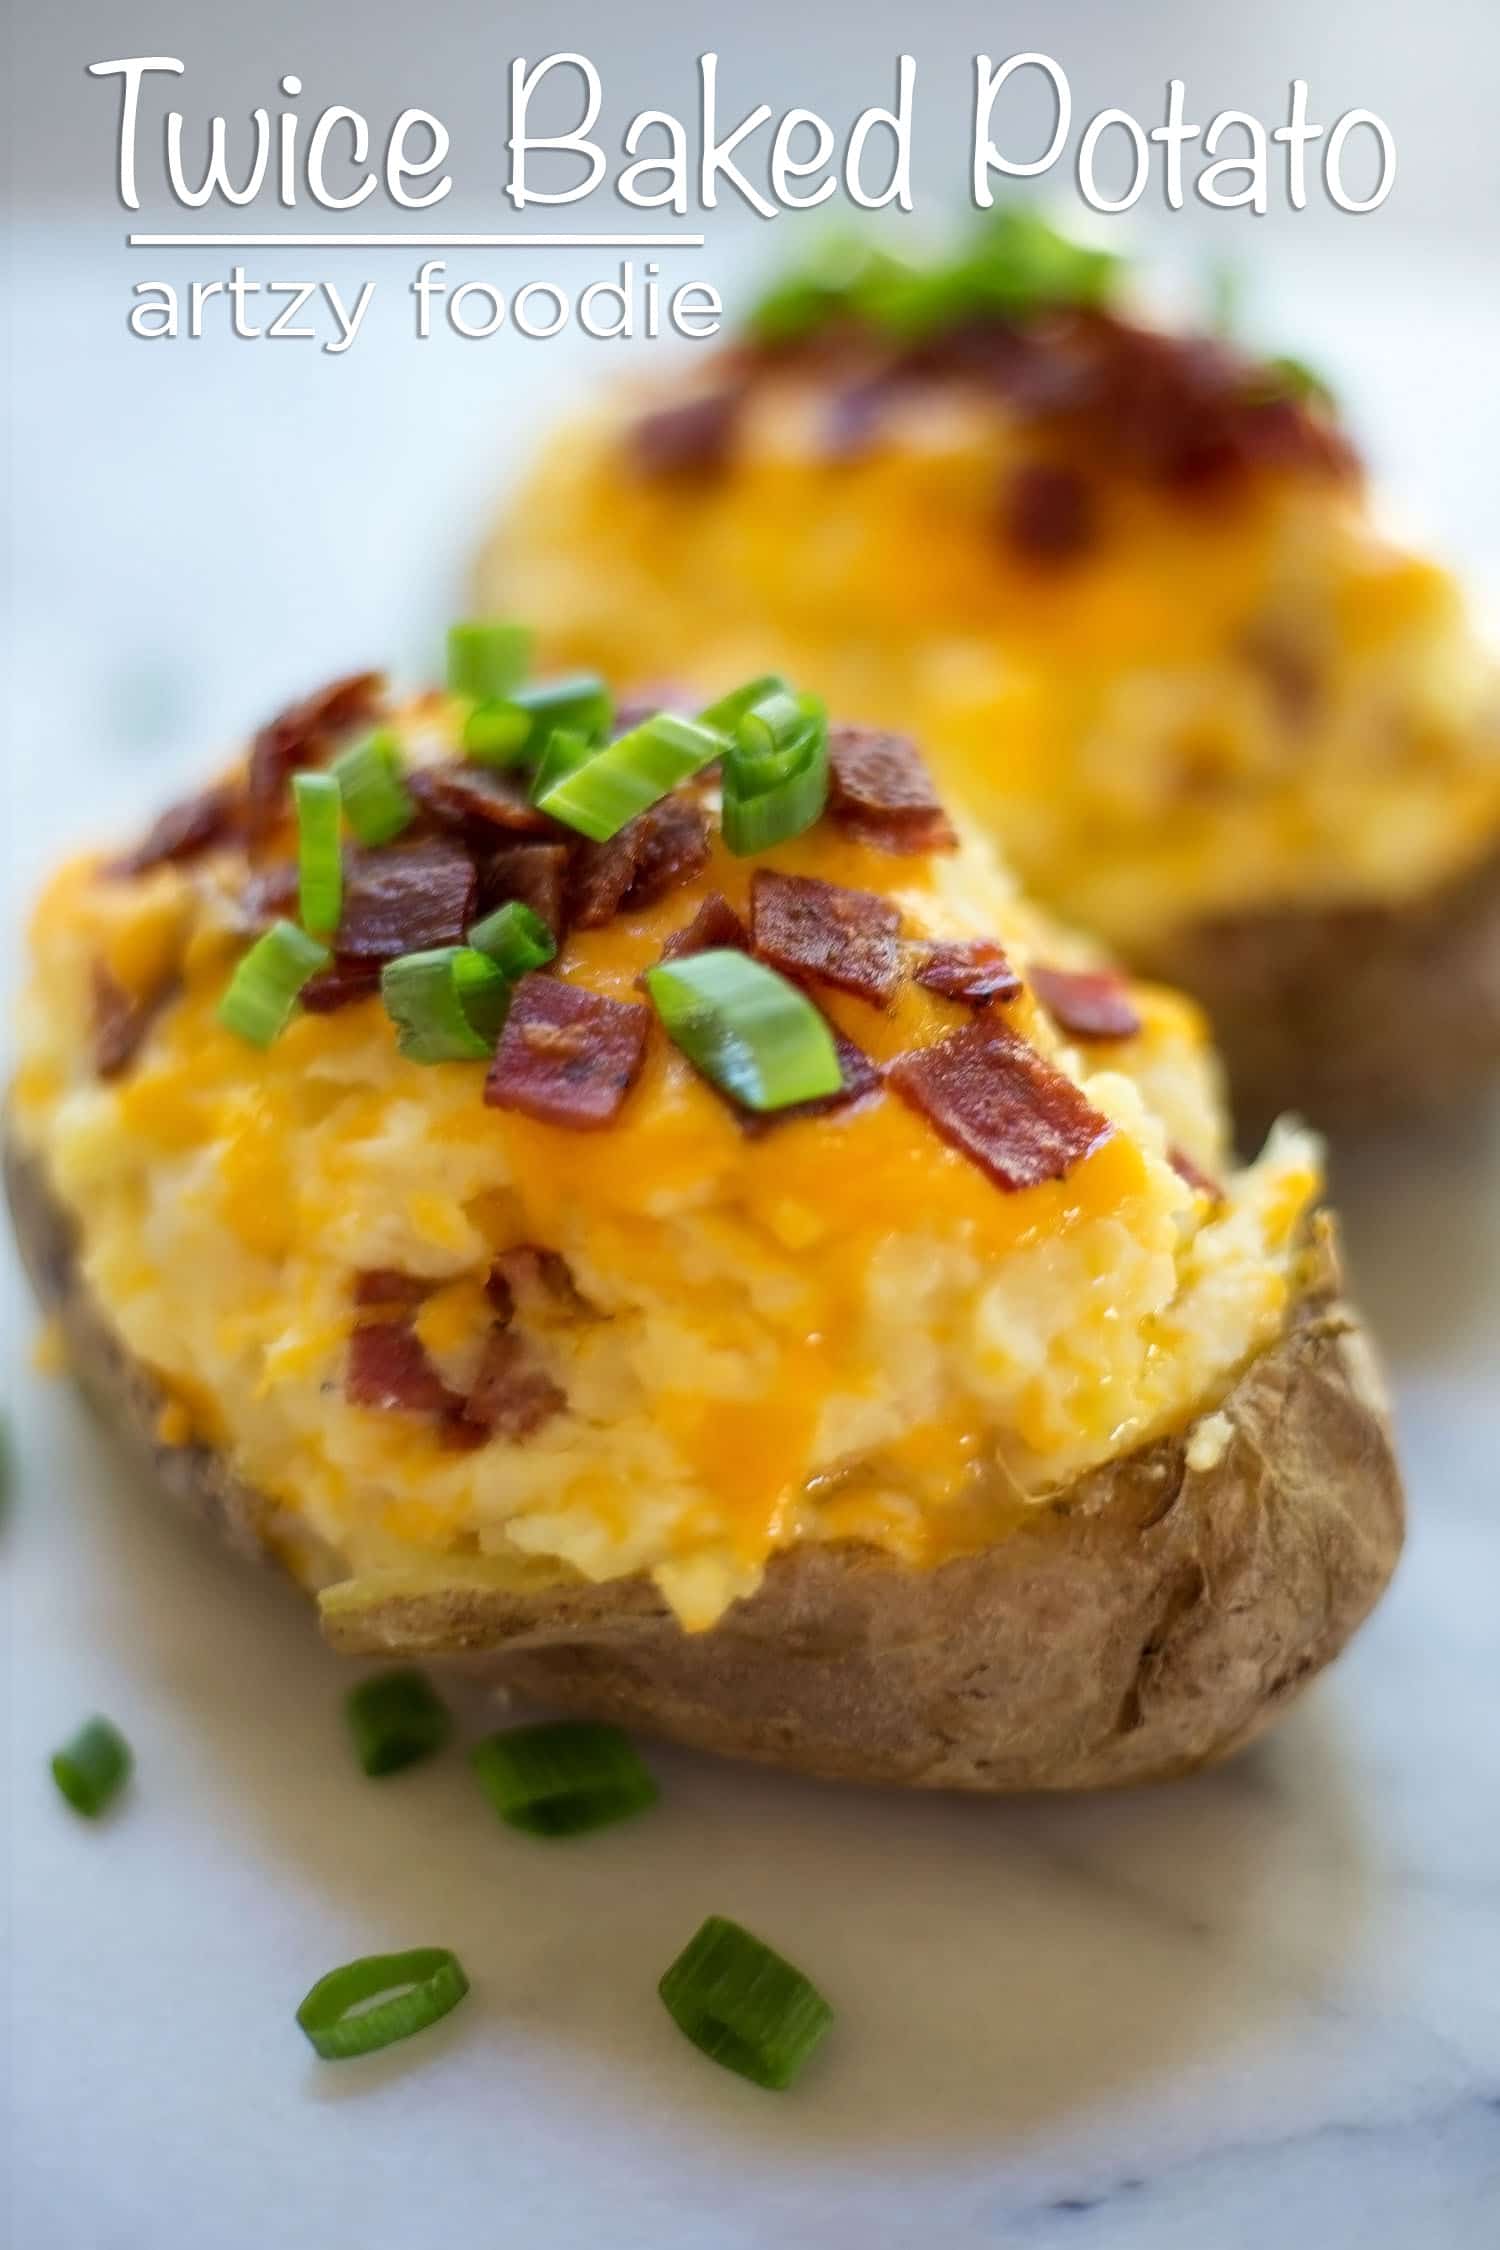 These twice baked potatoes are like little boats of heaven! |artzyfoodie.com|